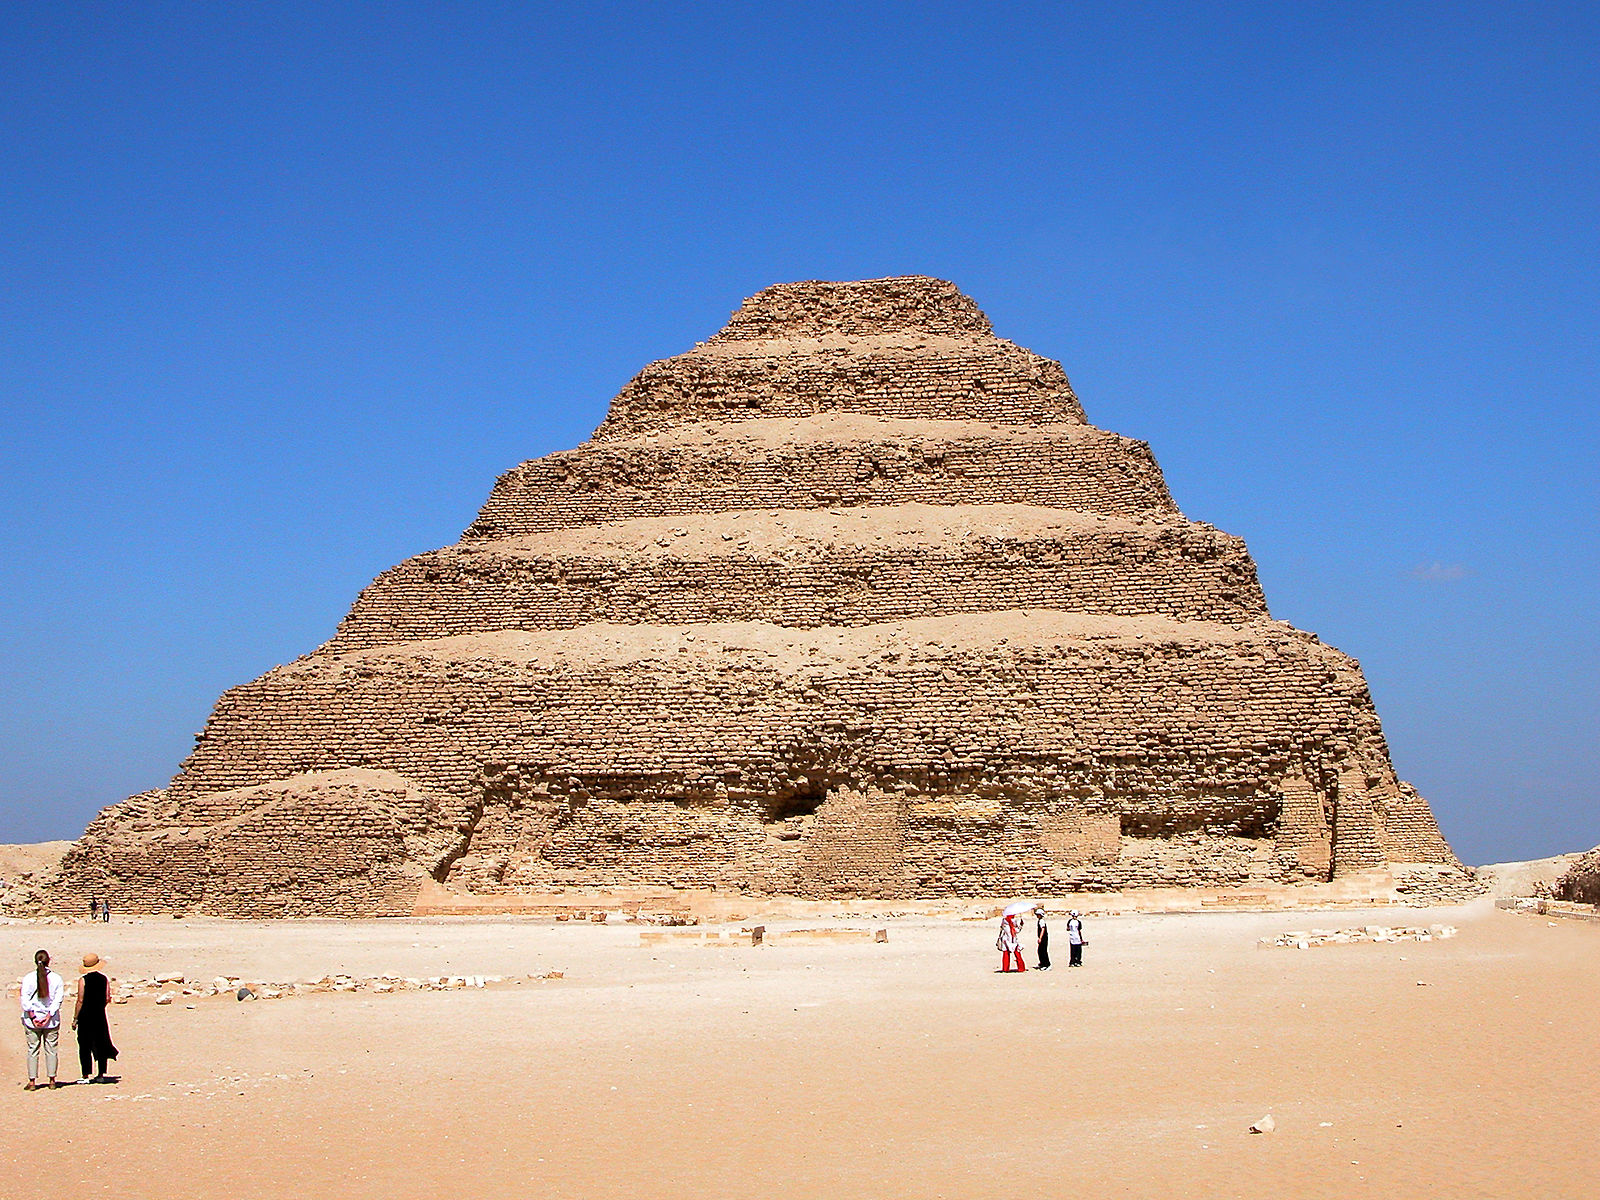 The Step Pyramid of Djoser is one of the earliest stone pyramids from Ancient Egypt, and has six layers of stacked stones.